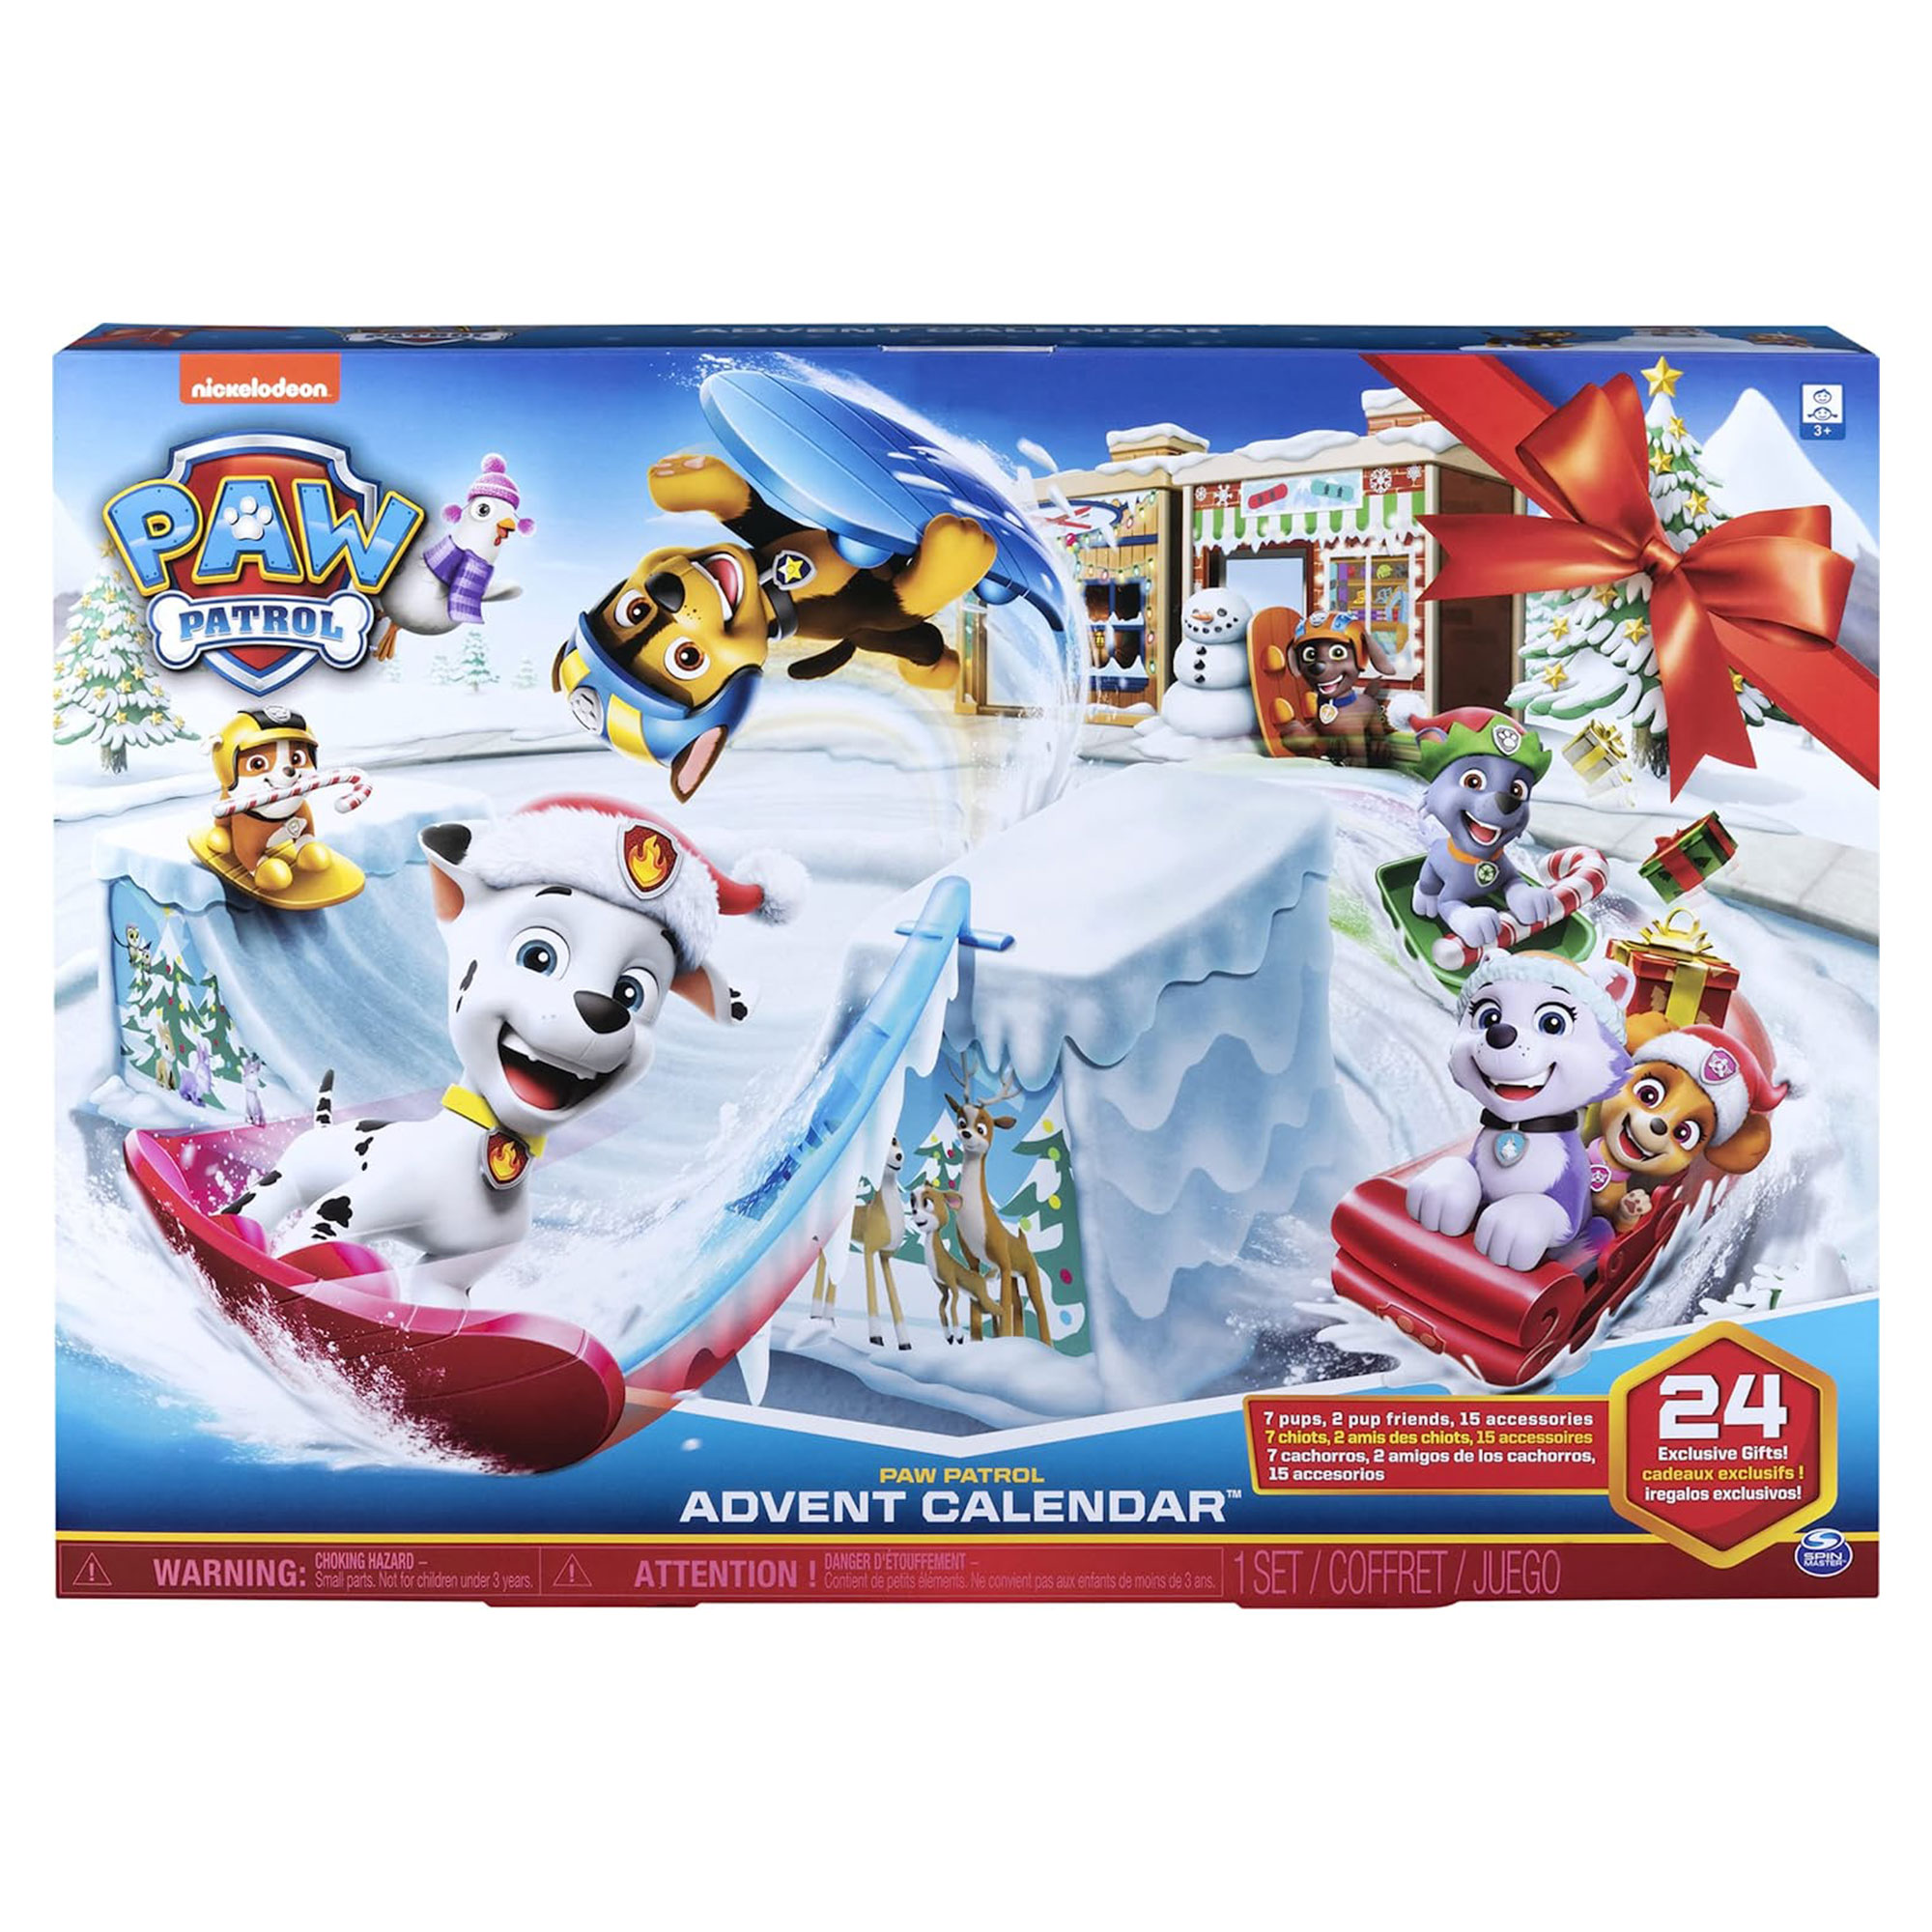 PAW Patrol Advent Calendar with 24 Collectible Toys for Kids Ages 3 & Up - image 5 of 6